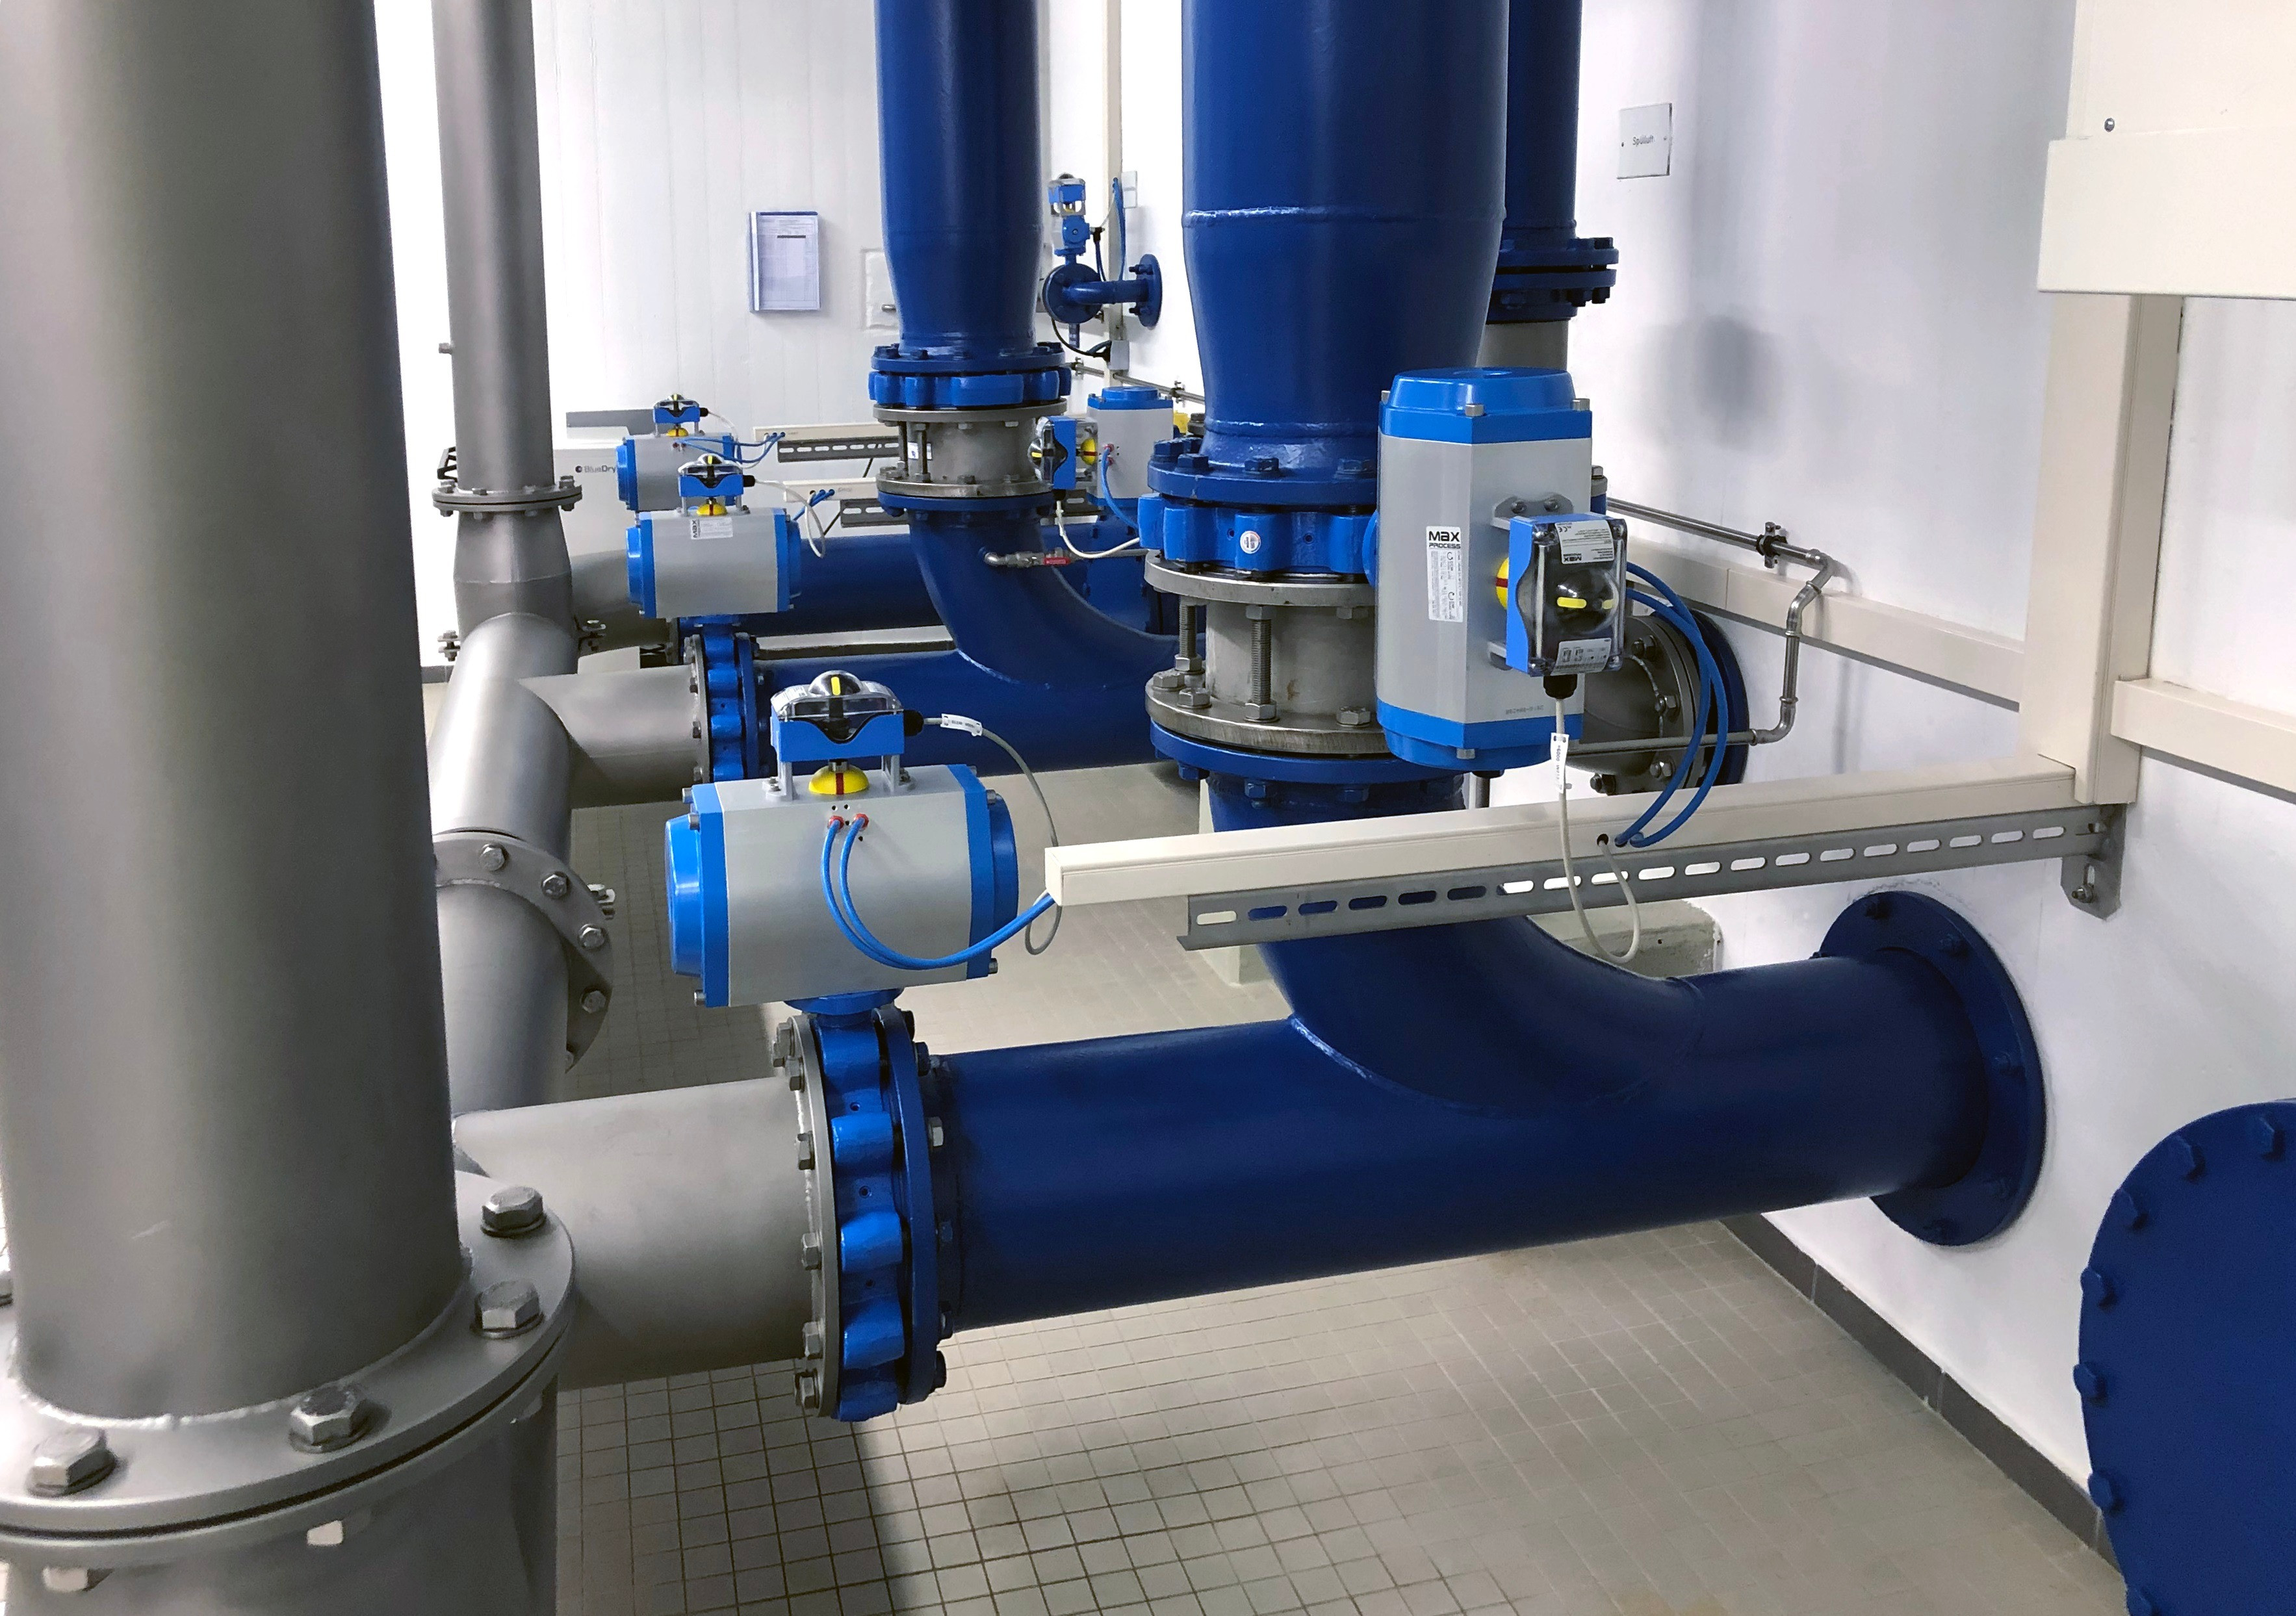 Rotork electric and pneumatic actuators chosen to deliver fresh water to German towns